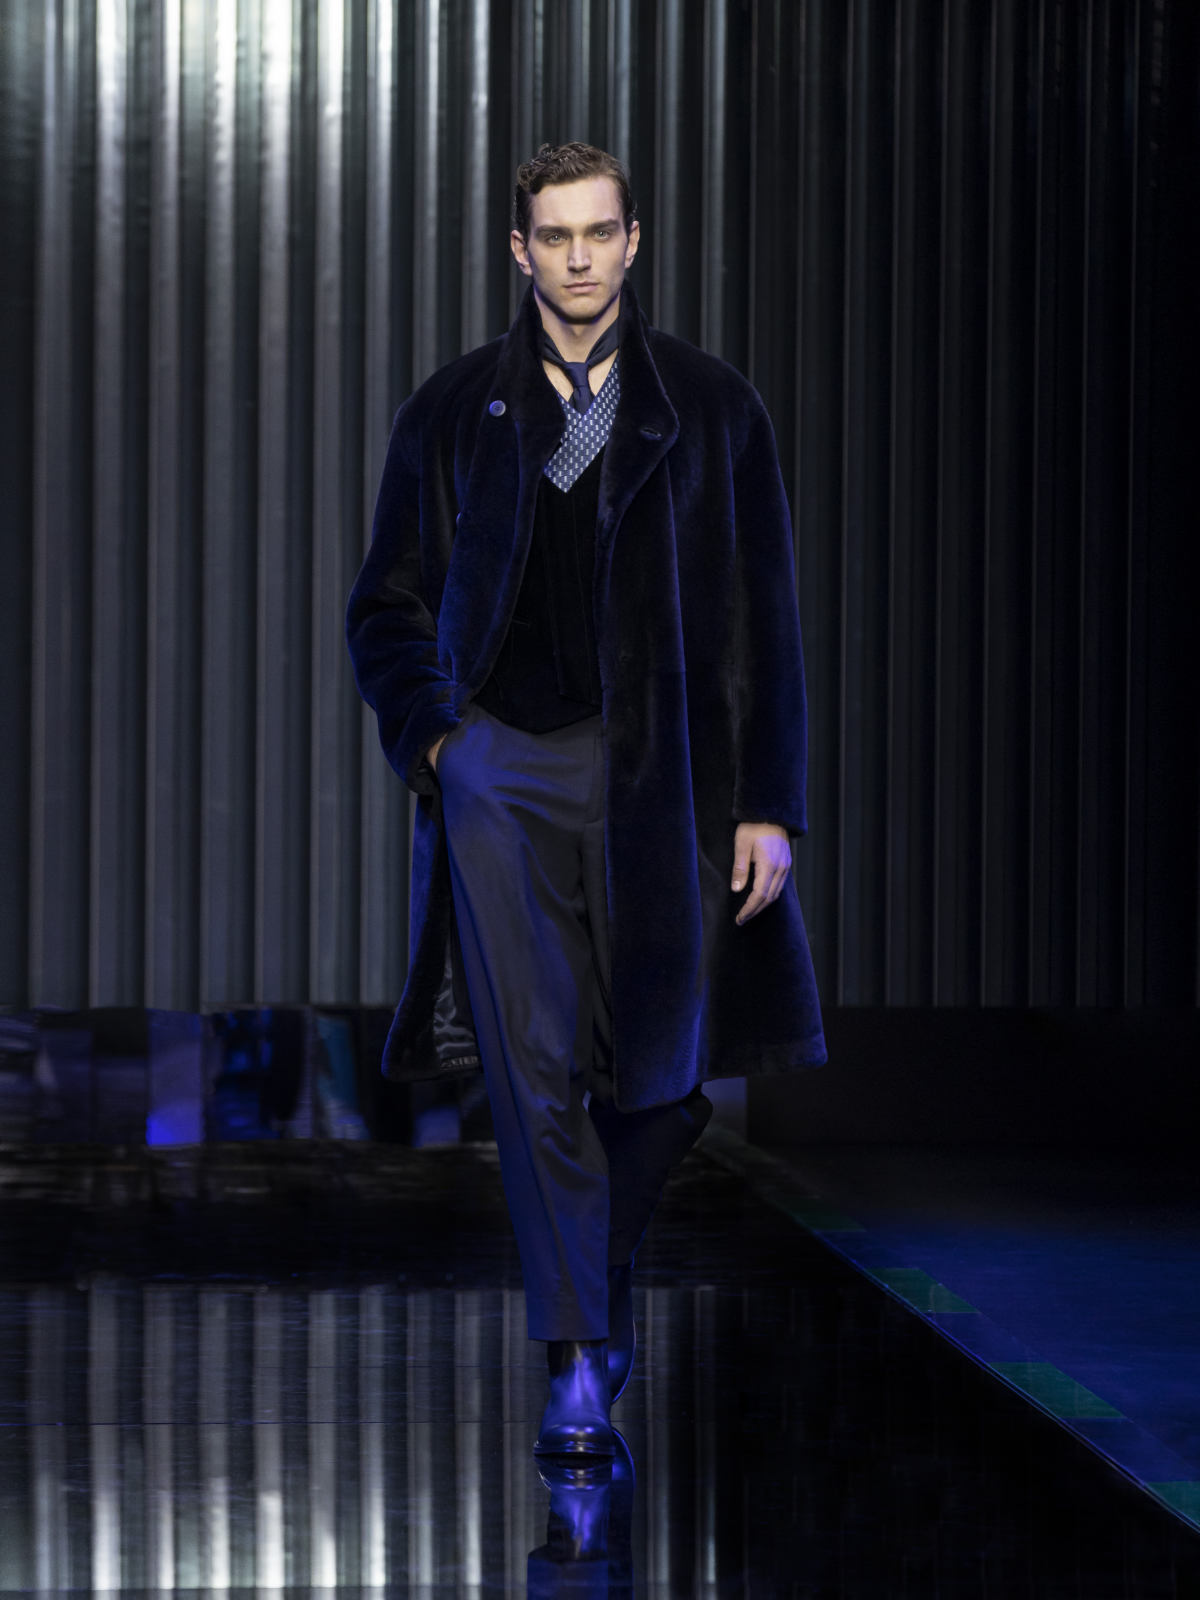 Giorgio Armani Presents Its New Men's And Women's Autumn/Winter 2022/23 Collection: Signs Of Light